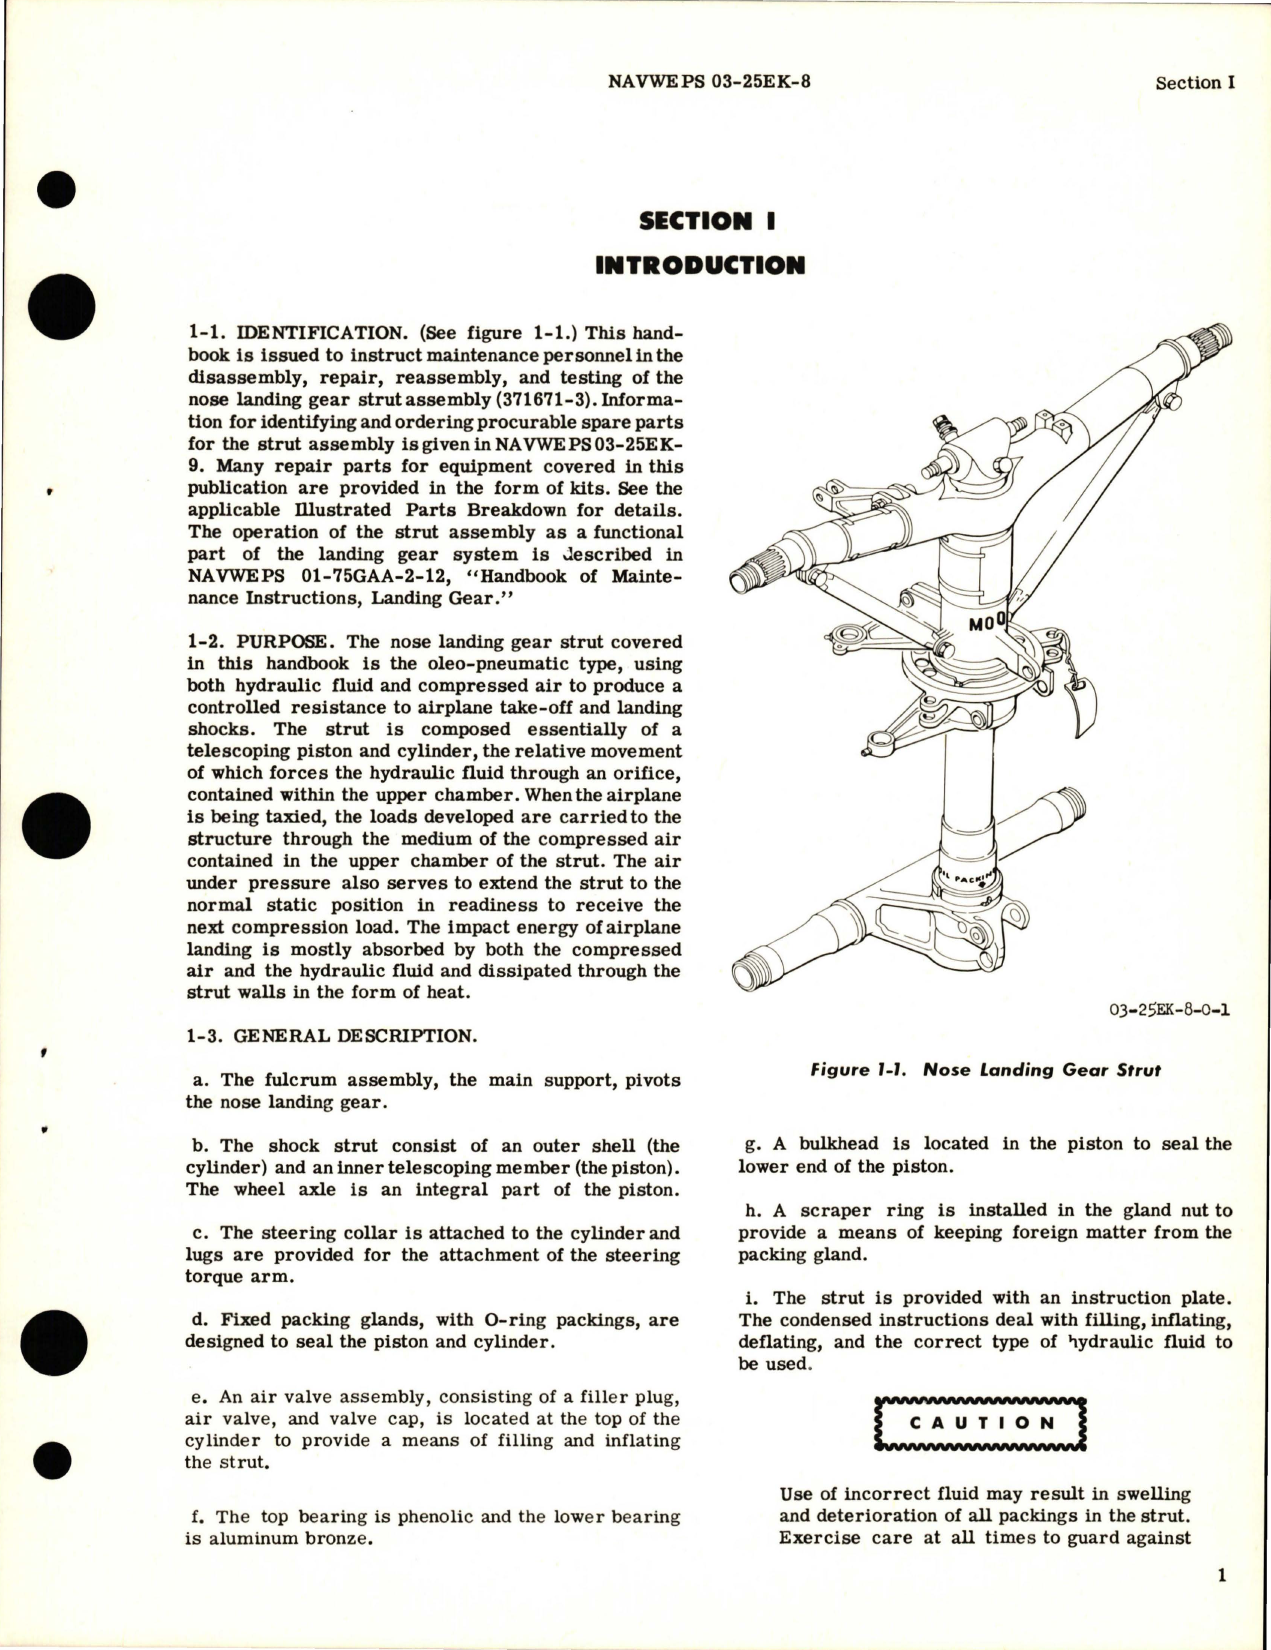 Sample page 5 from AirCorps Library document: Overhaul Instructions for Nose Landing Gear Strut Assembly - Parts 371671-3 and 380202-1